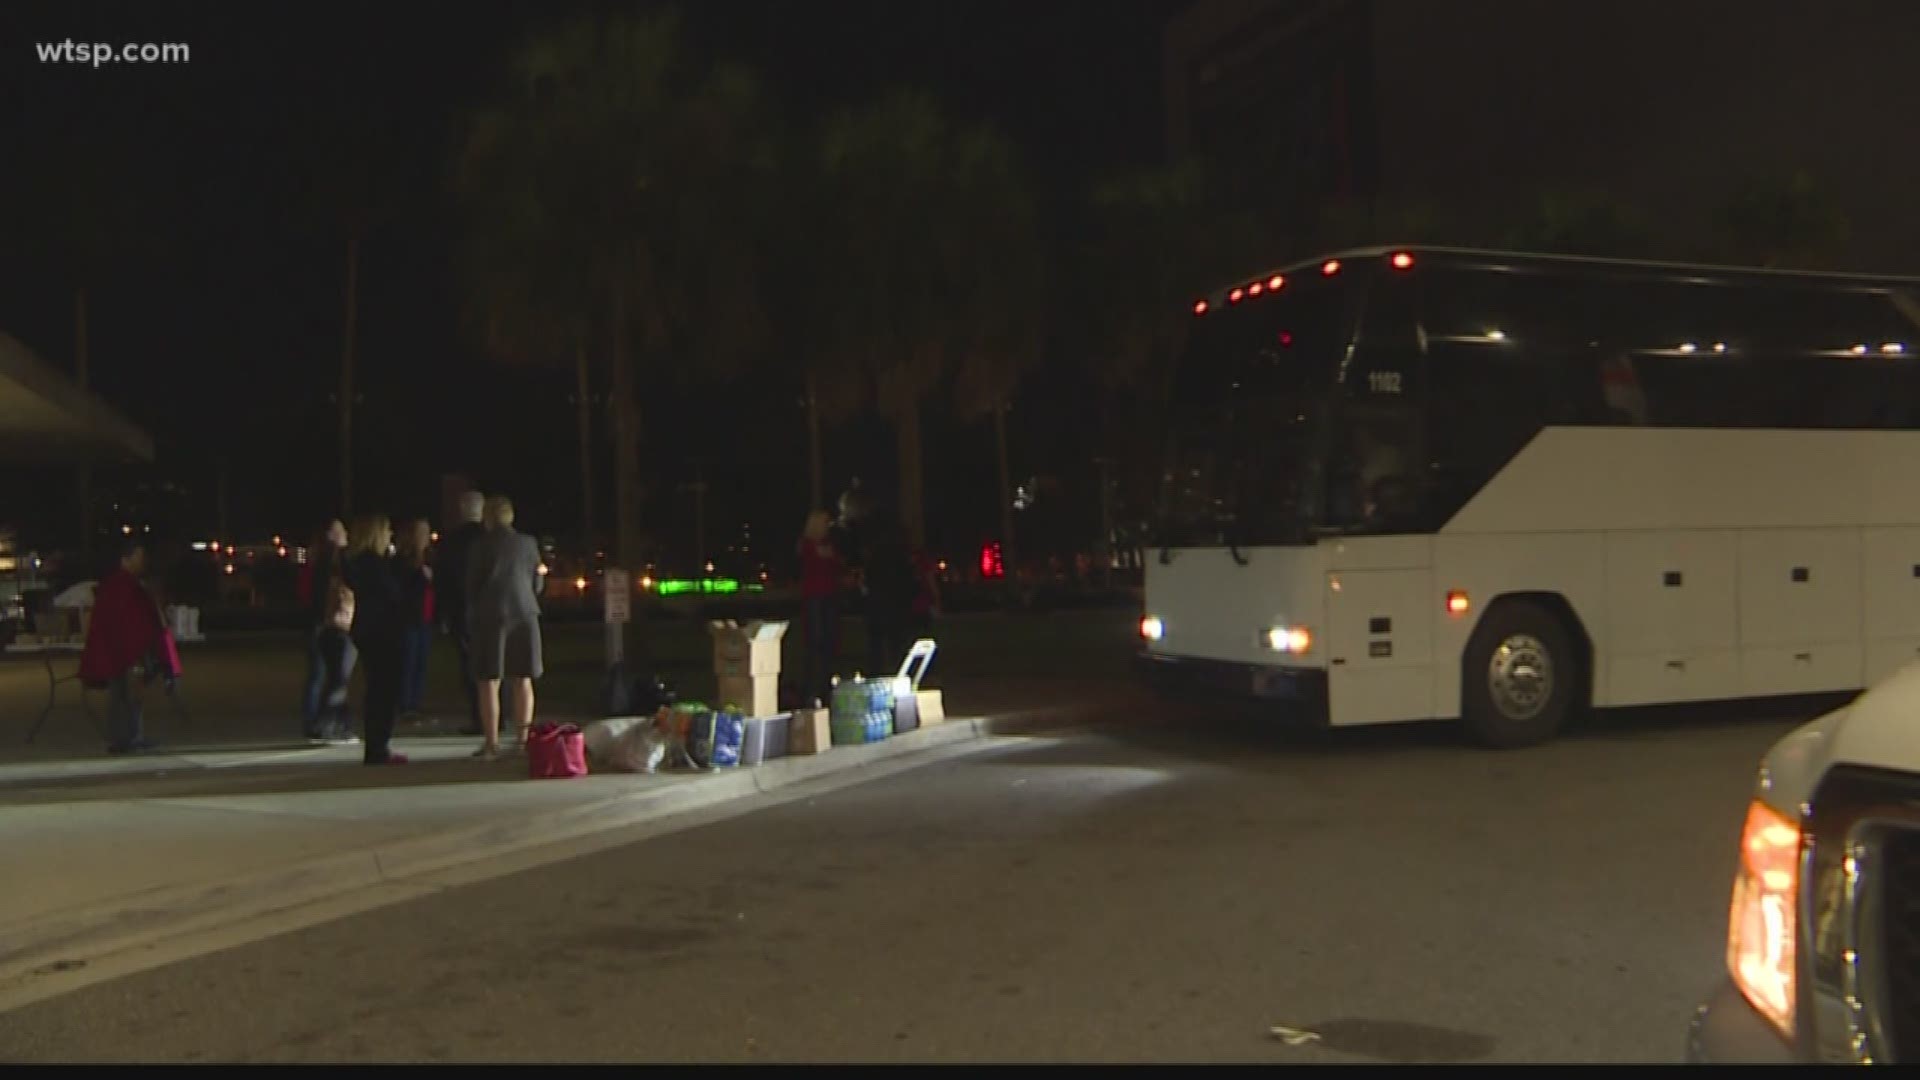 The group of women left Tampa on Wednesday morning to head to Tallahassee.